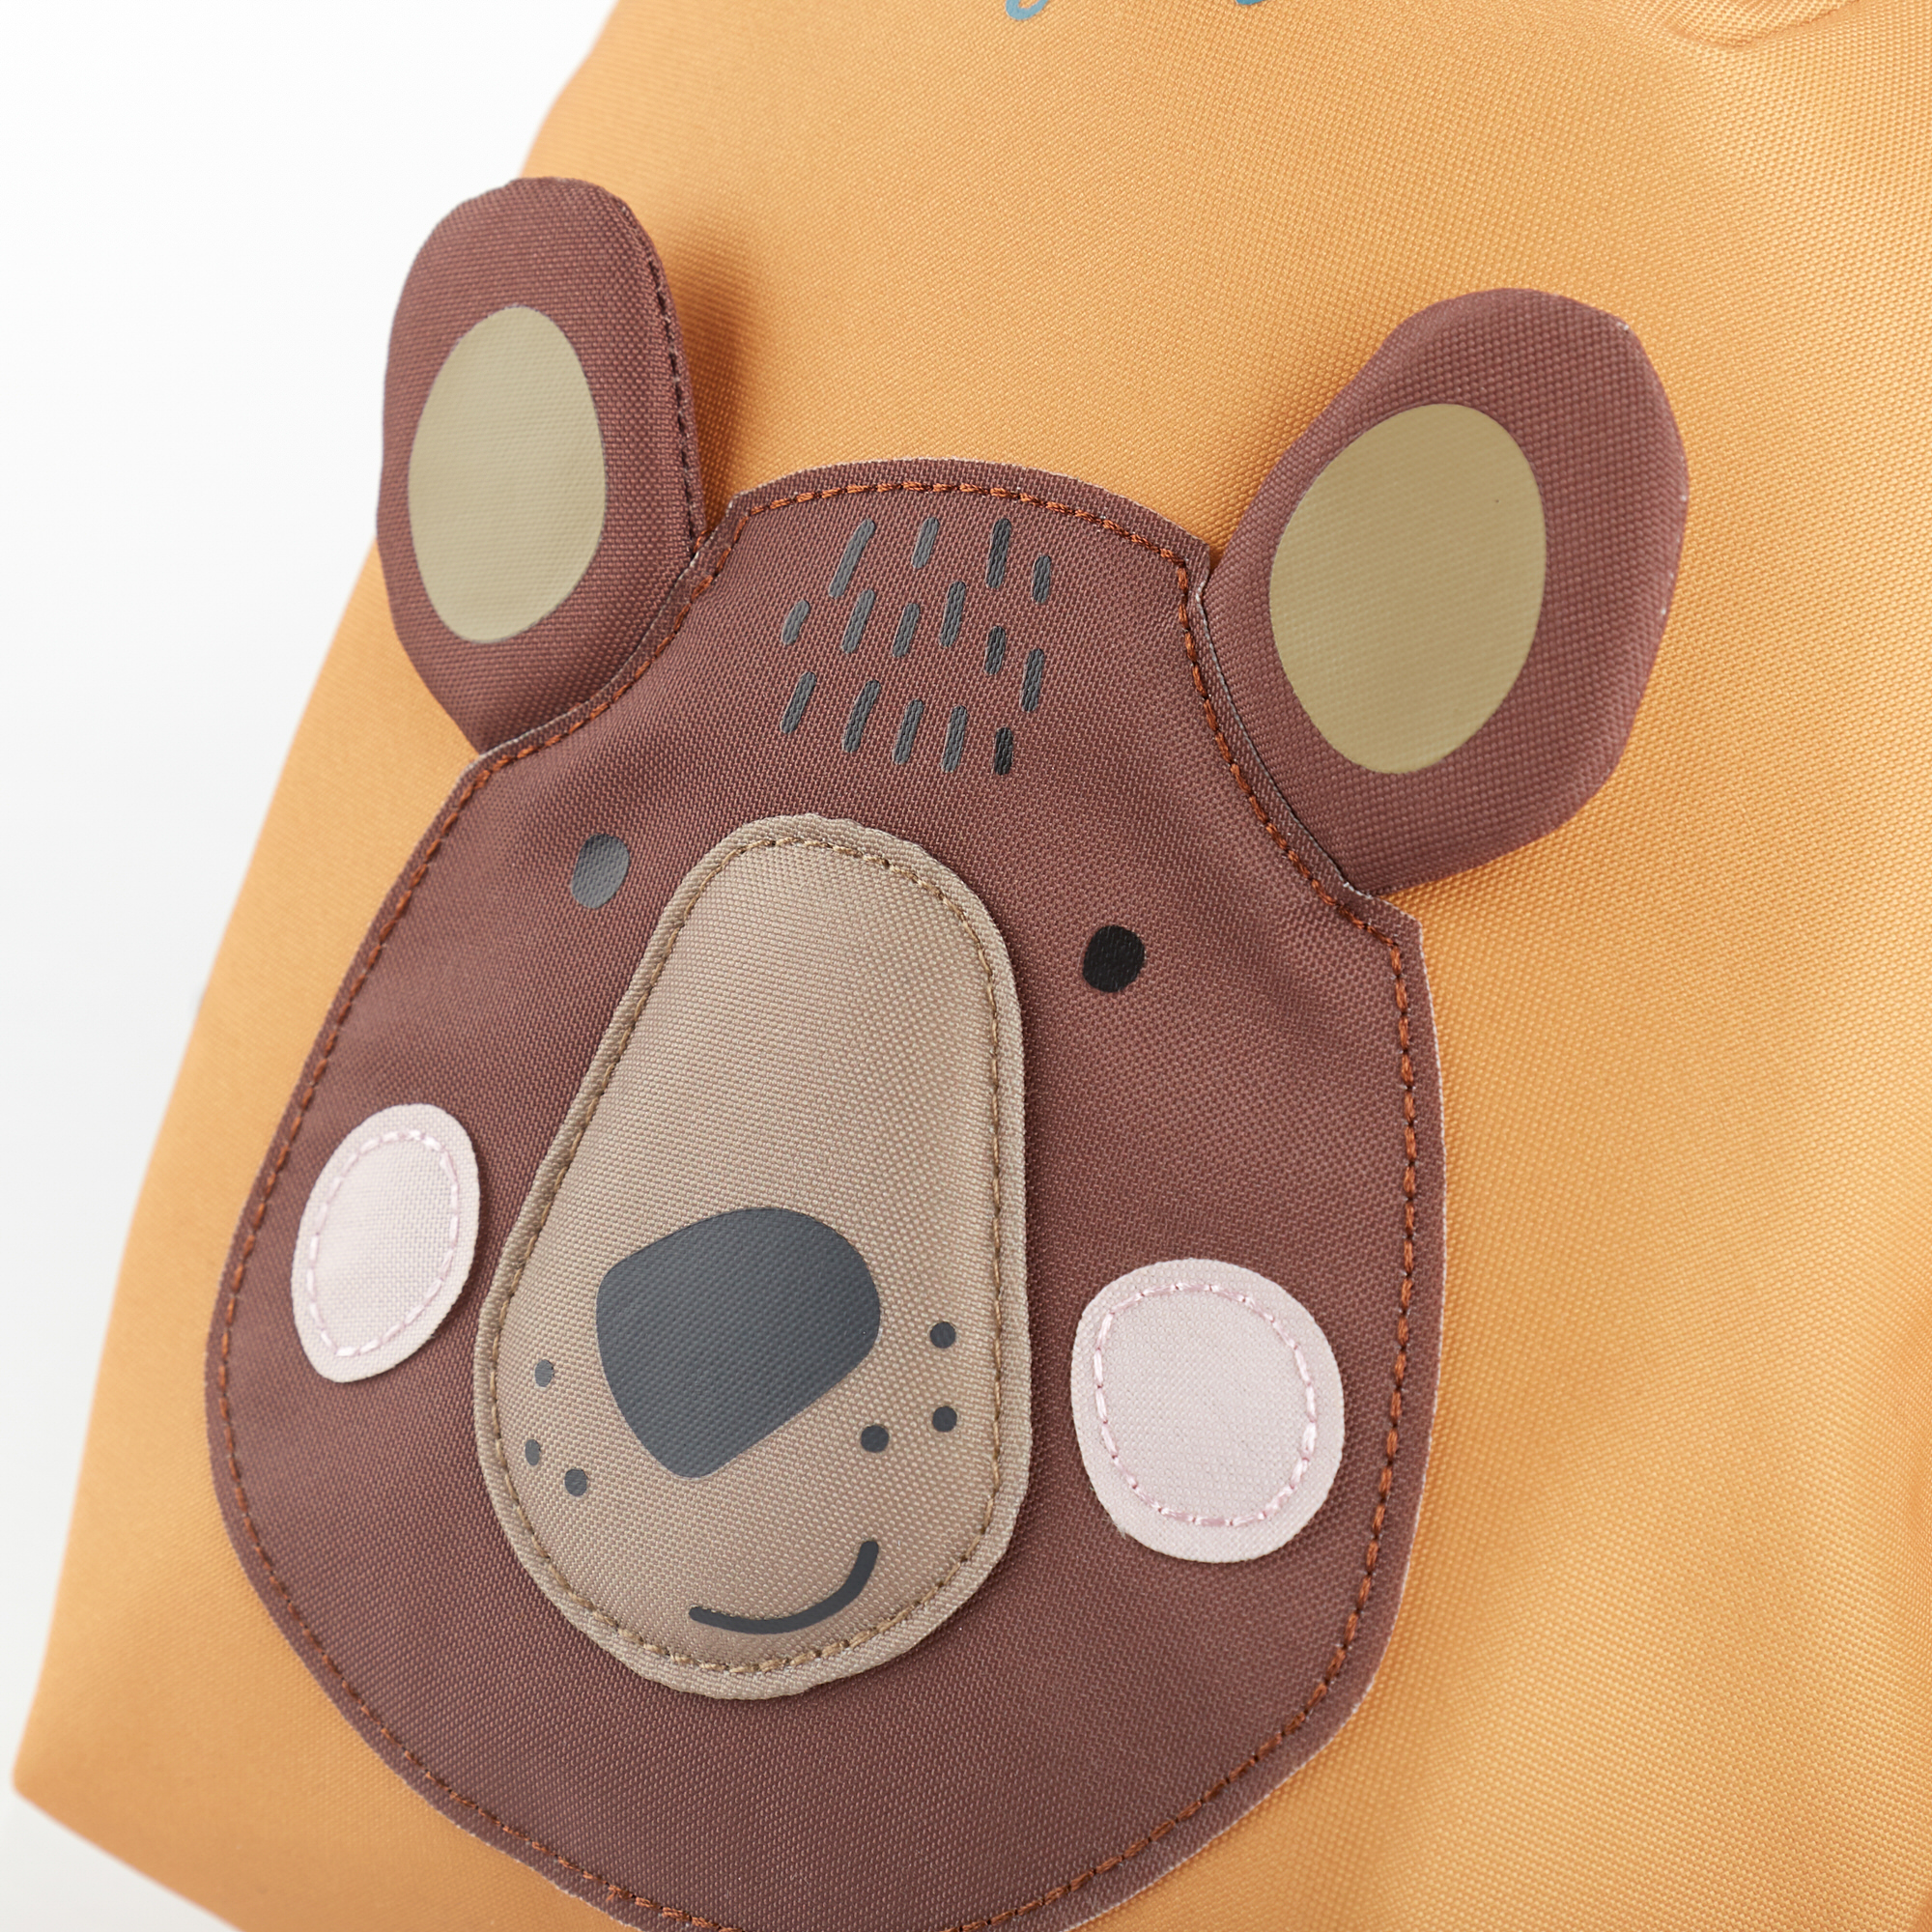 Backpack bear, for toddlers